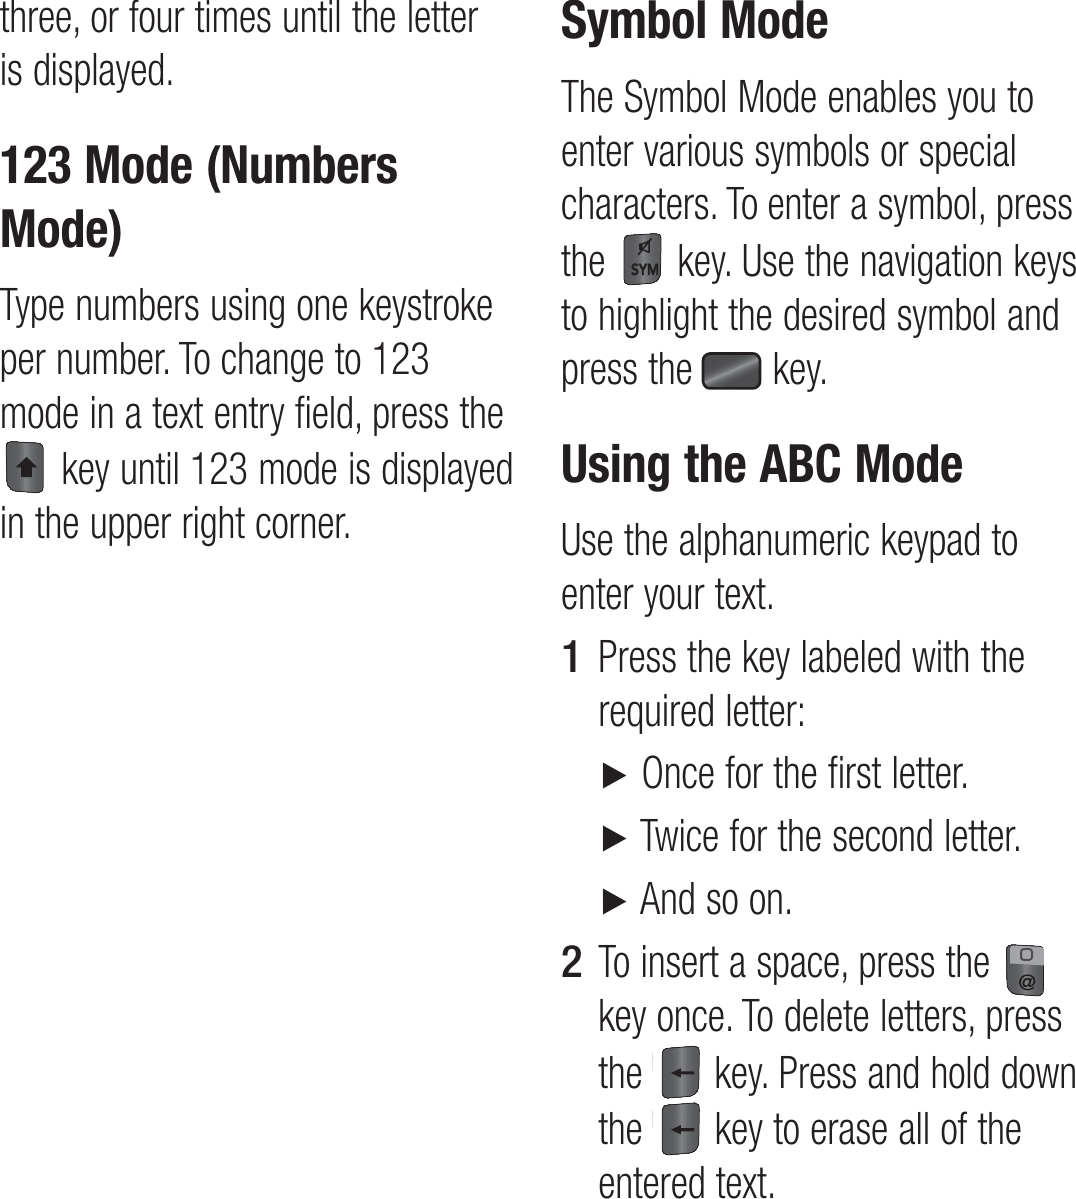 three, or four times until the letter is displayed.123 Mode (Numbers Mode)Type numbers using one keystroke per number. To change to 123 mode in a text entry field, press the  key until 123 mode is displayed in the upper right corner.Symbol ModeThe Symbol Mode enables you to enter various symbols or special characters. To enter a symbol, press the   key. Use the navigation keys to highlight the desired symbol and press the   key.Using the ABC ModeUse the alphanumeric keypad to enter your text.Press the key labeled with the required letter: ►  Once for the first letter. ►  Twice for the second letter. ►  And so on.To insert a space, press the   key once. To delete letters, press the   key. Press and hold down the  key to erase all of the entered text.1 2 